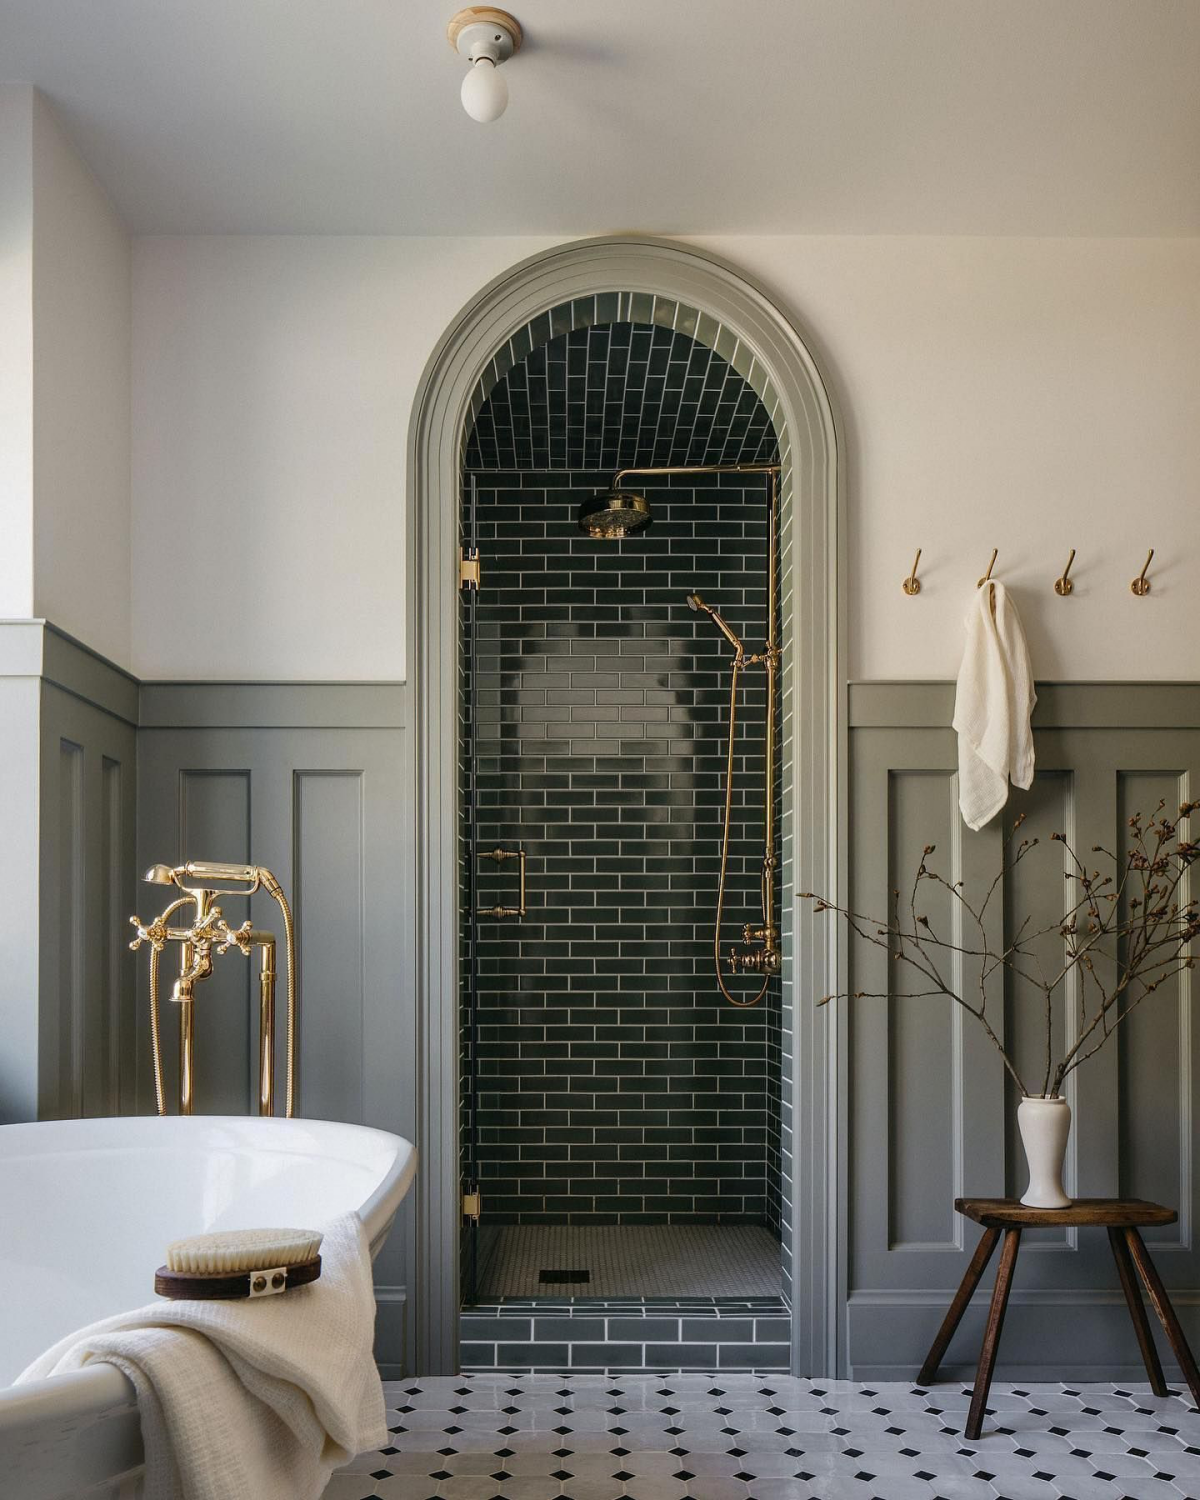 small arched shower with dark forest green tiles